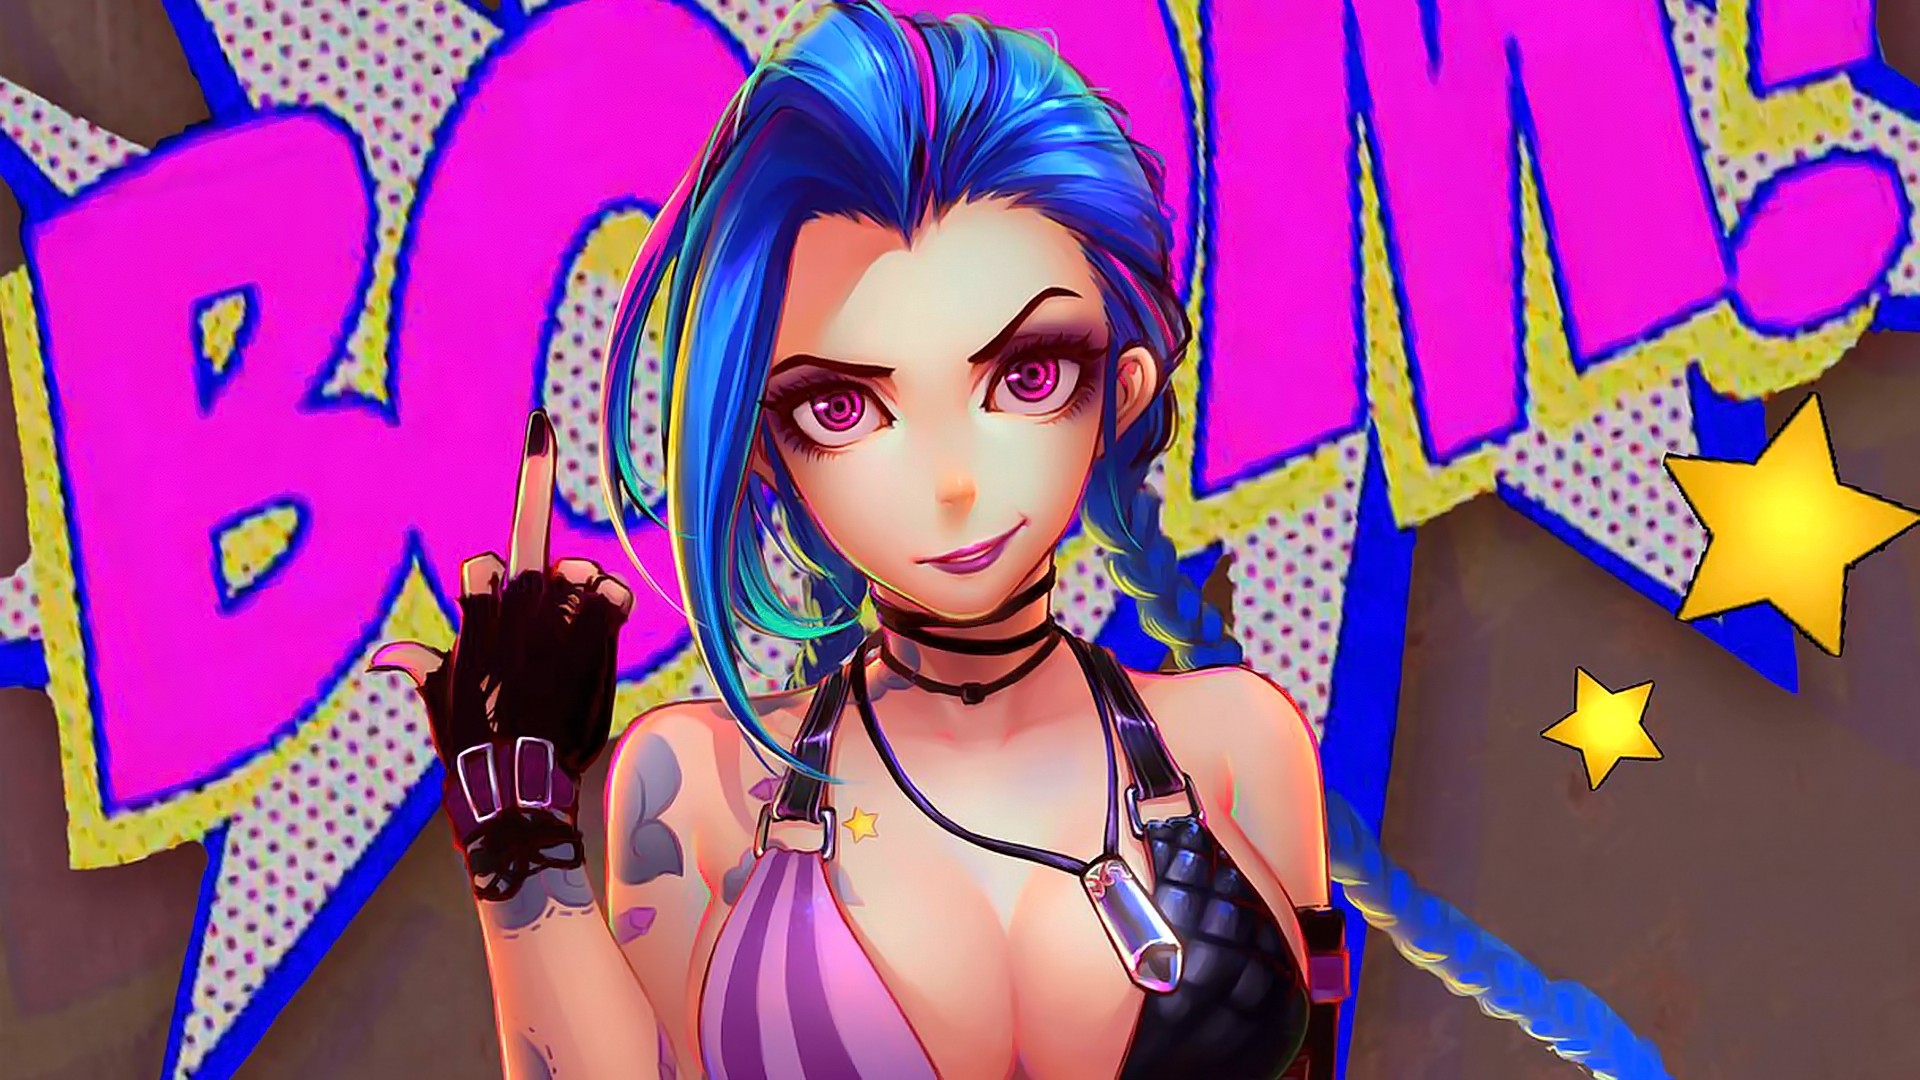 Anime 1920x1080 anime anime girls League of Legends Jinx (League of Legends) pink middle finger video game characters PC gaming obscene hand gesture smiling boobs big boobs blue hair video game art video game girls fingerless gloves